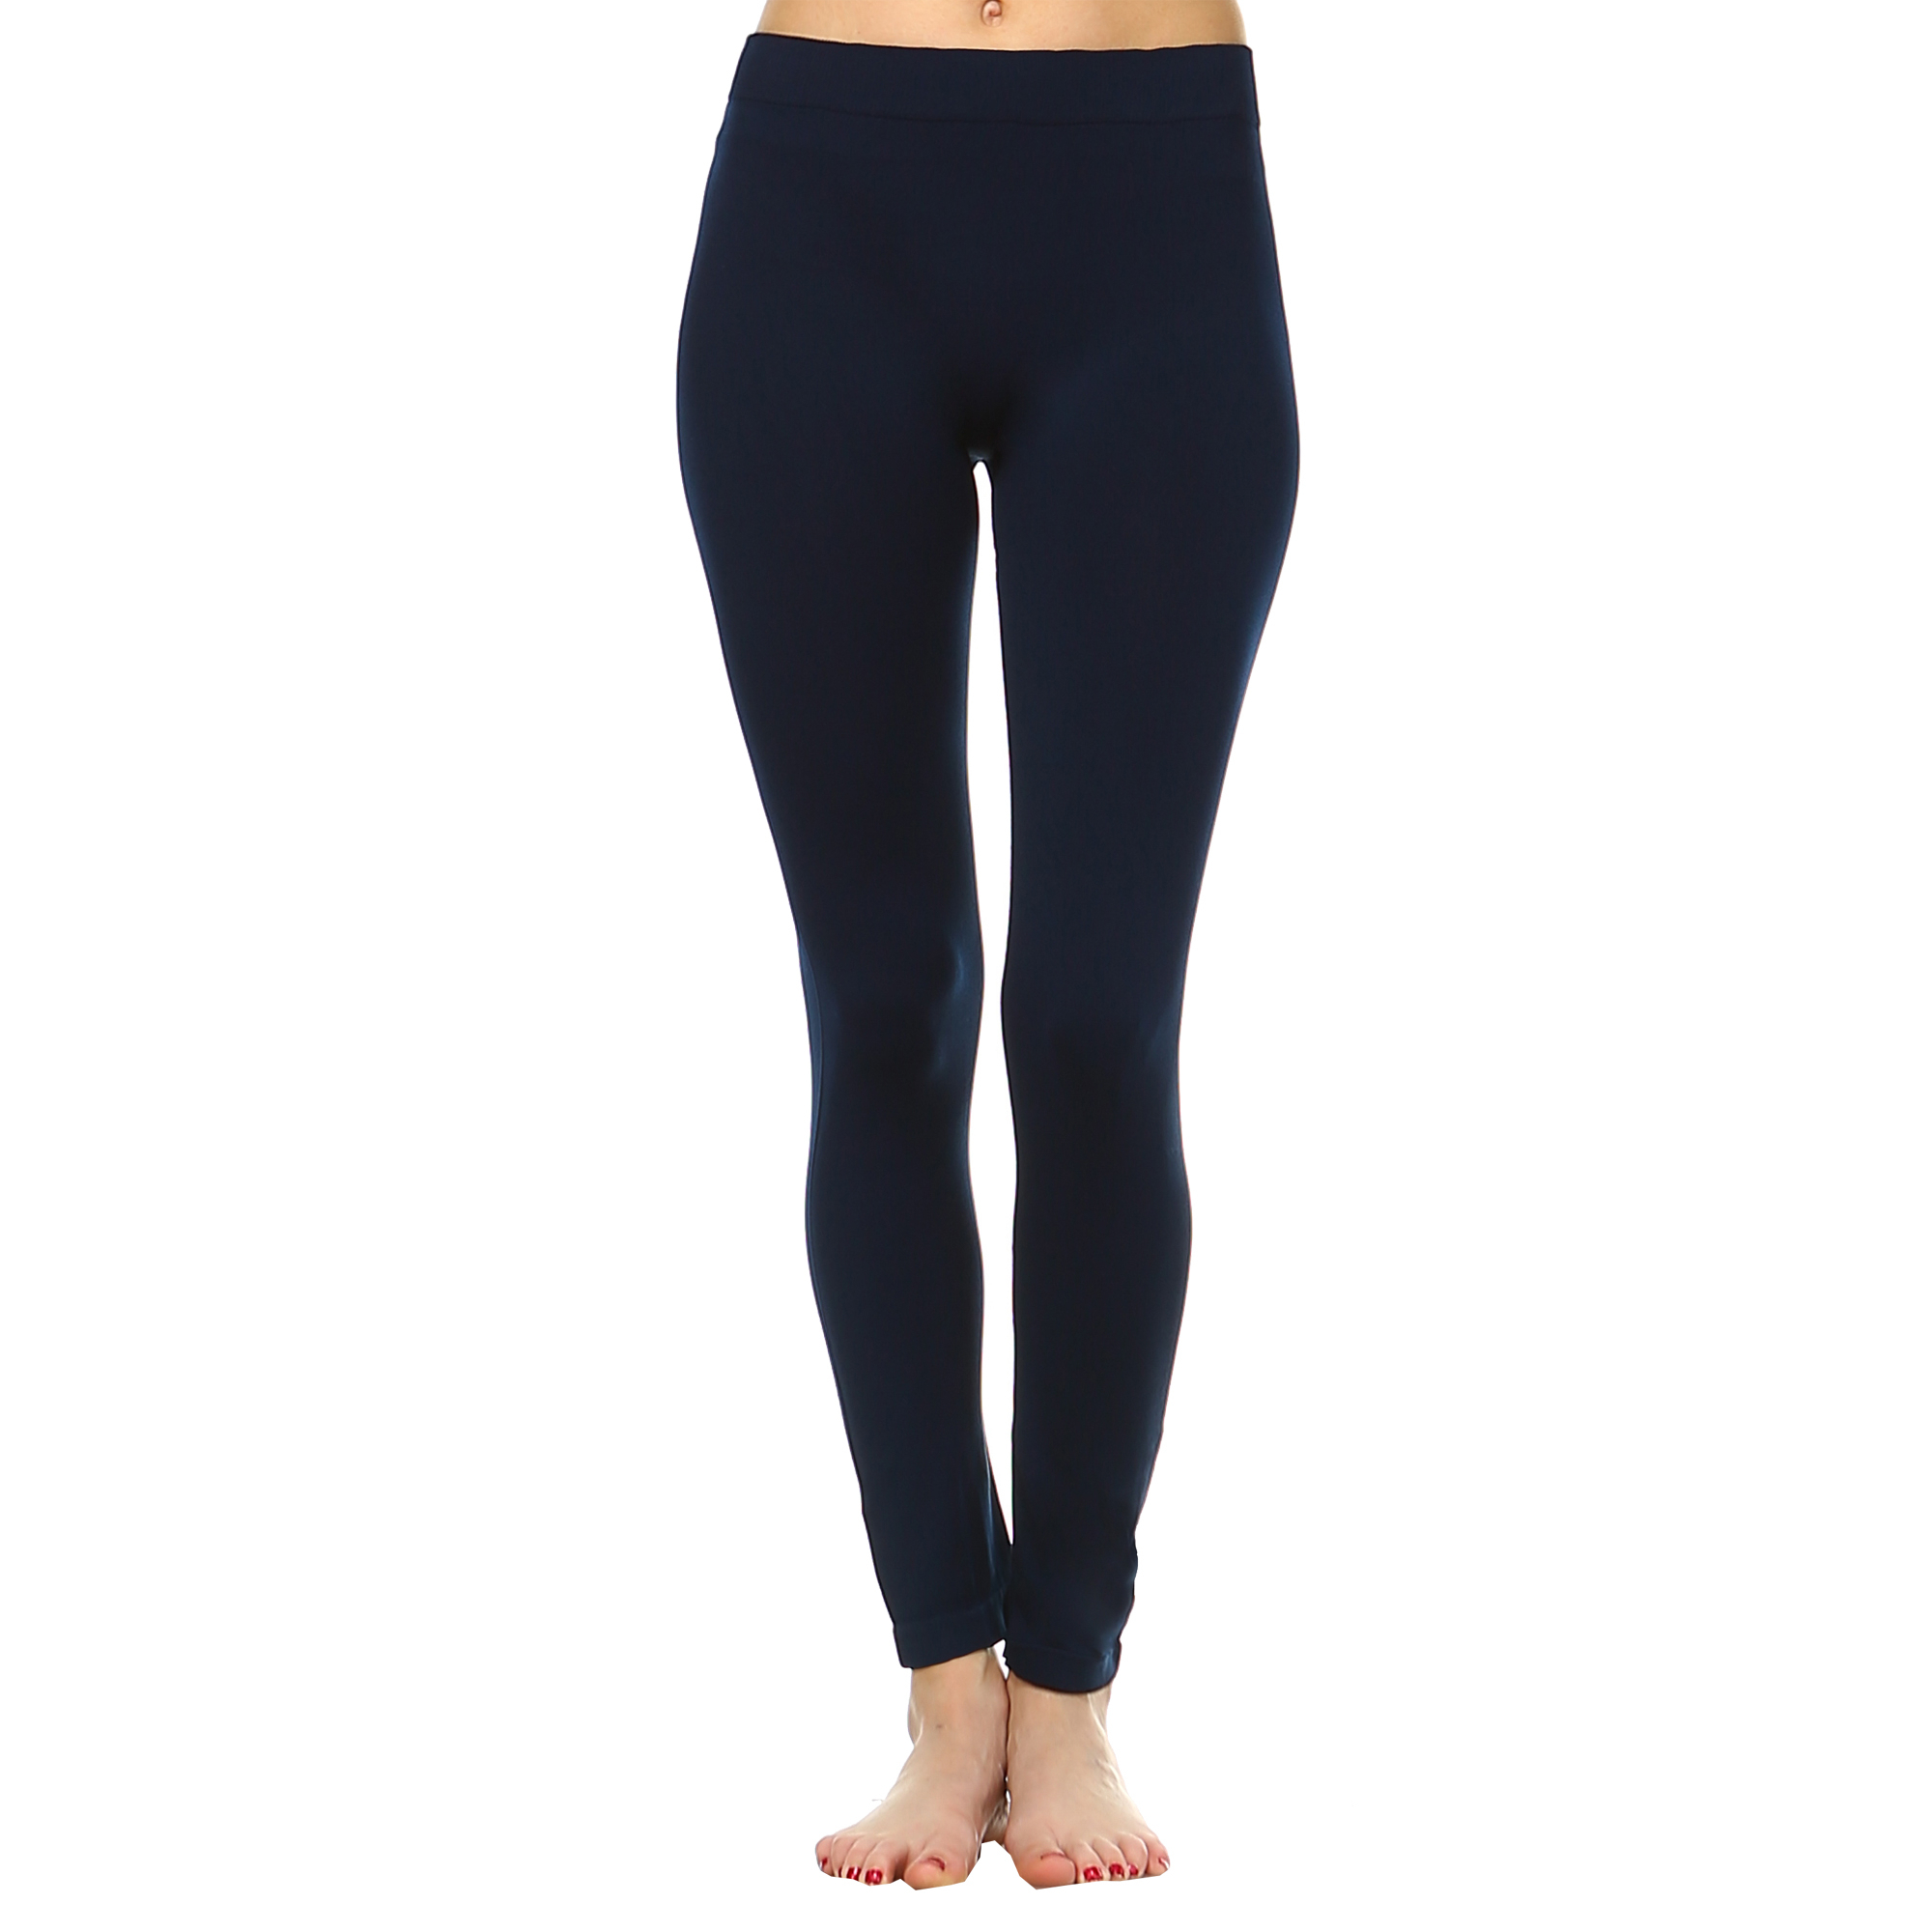 White Mark Women's Stretch Leggings - Charcoal, One Size